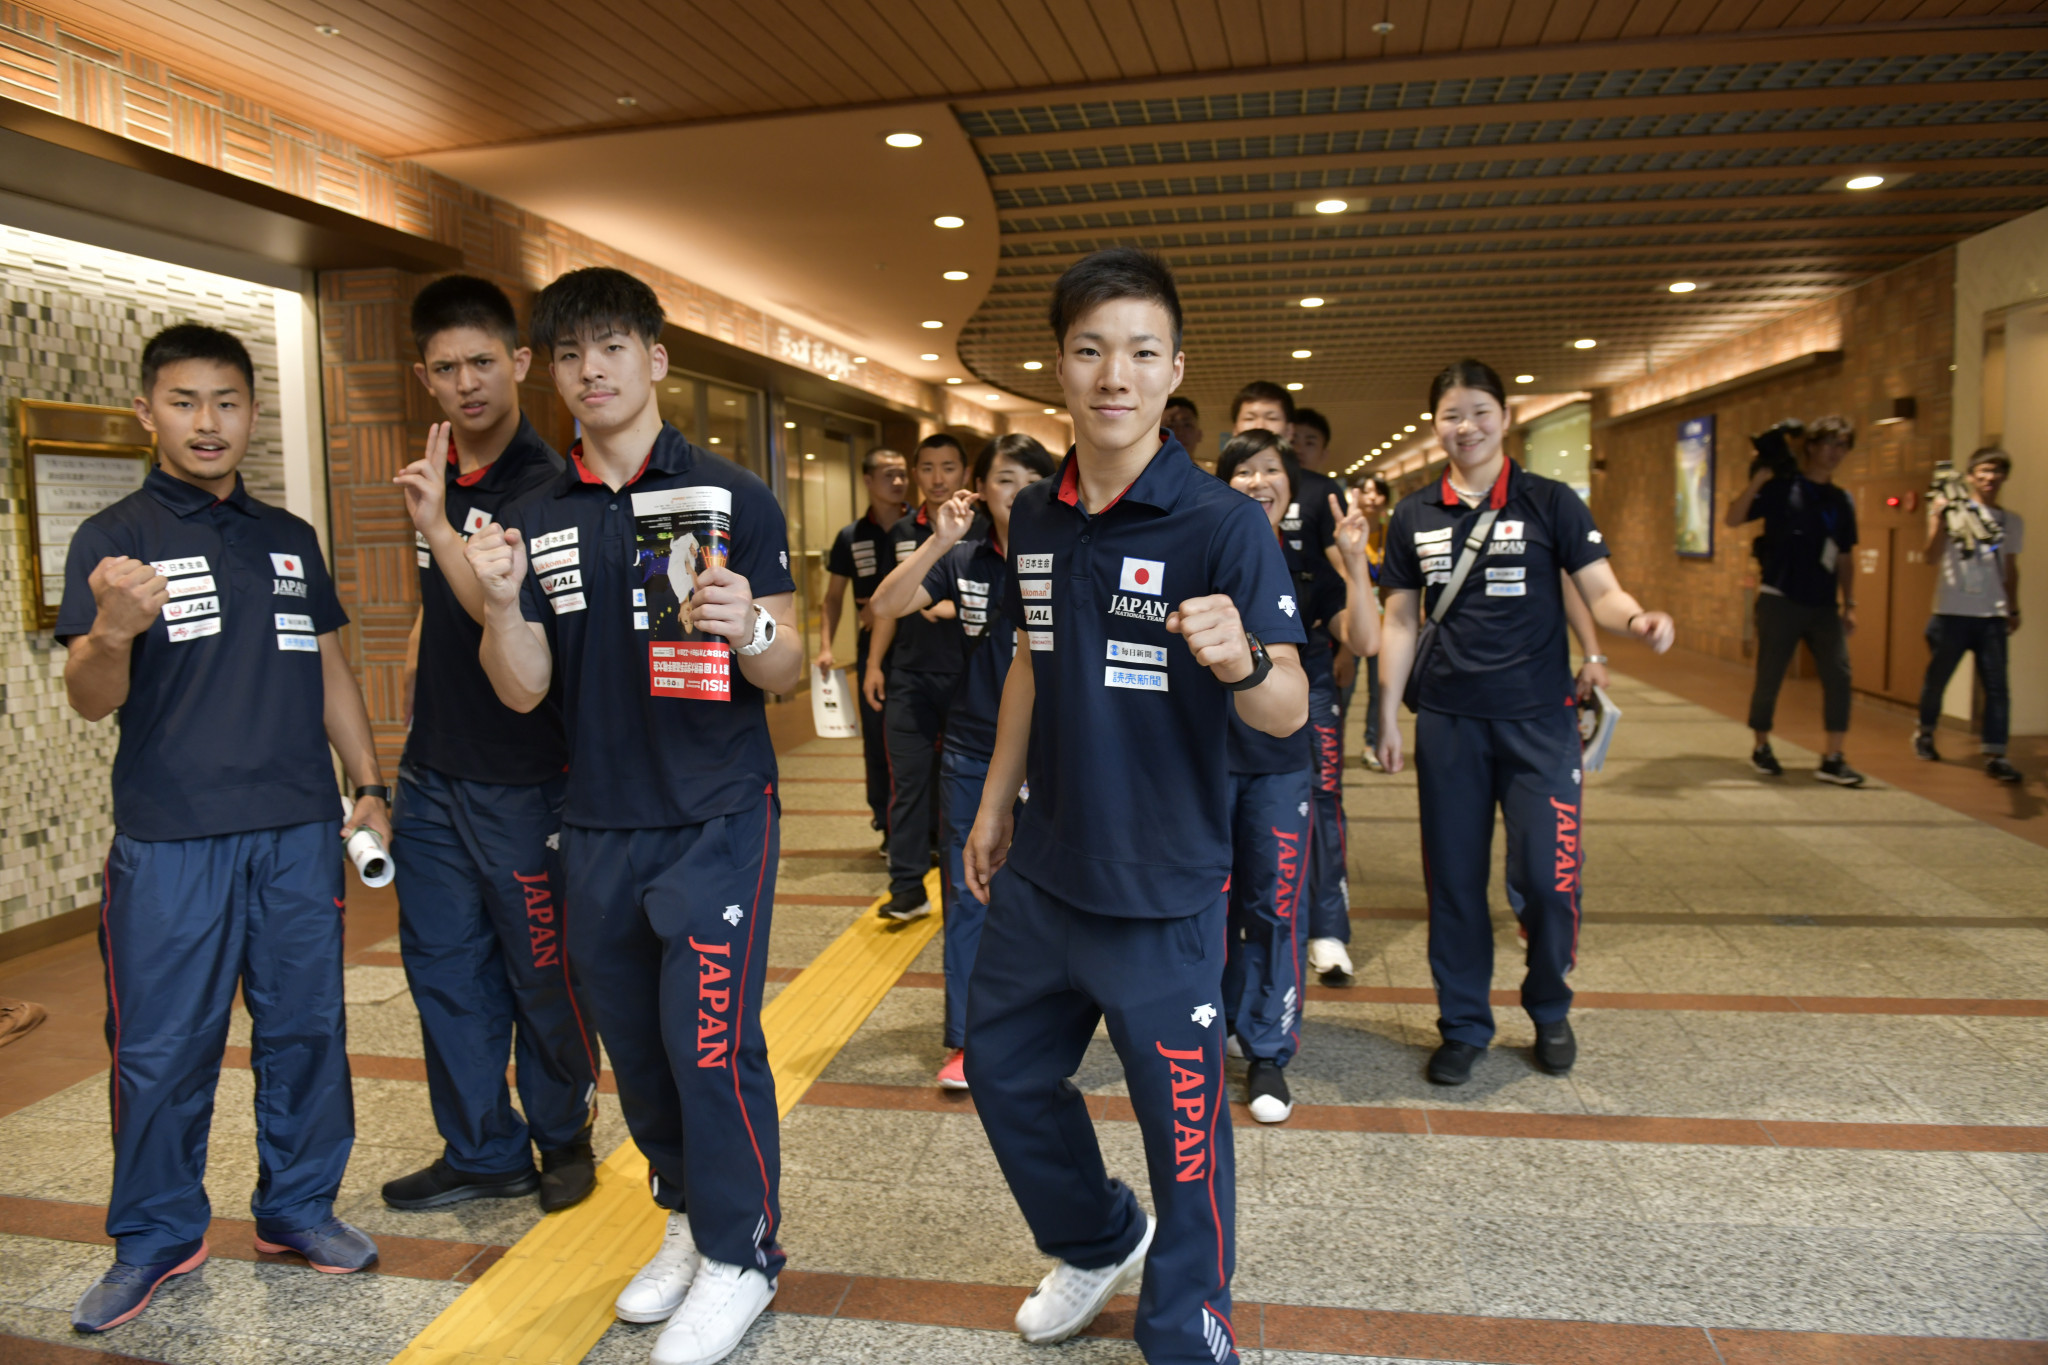 Hosts Japan had an extremely successful first day at the World University Karate Championships in Kobe ©FISU